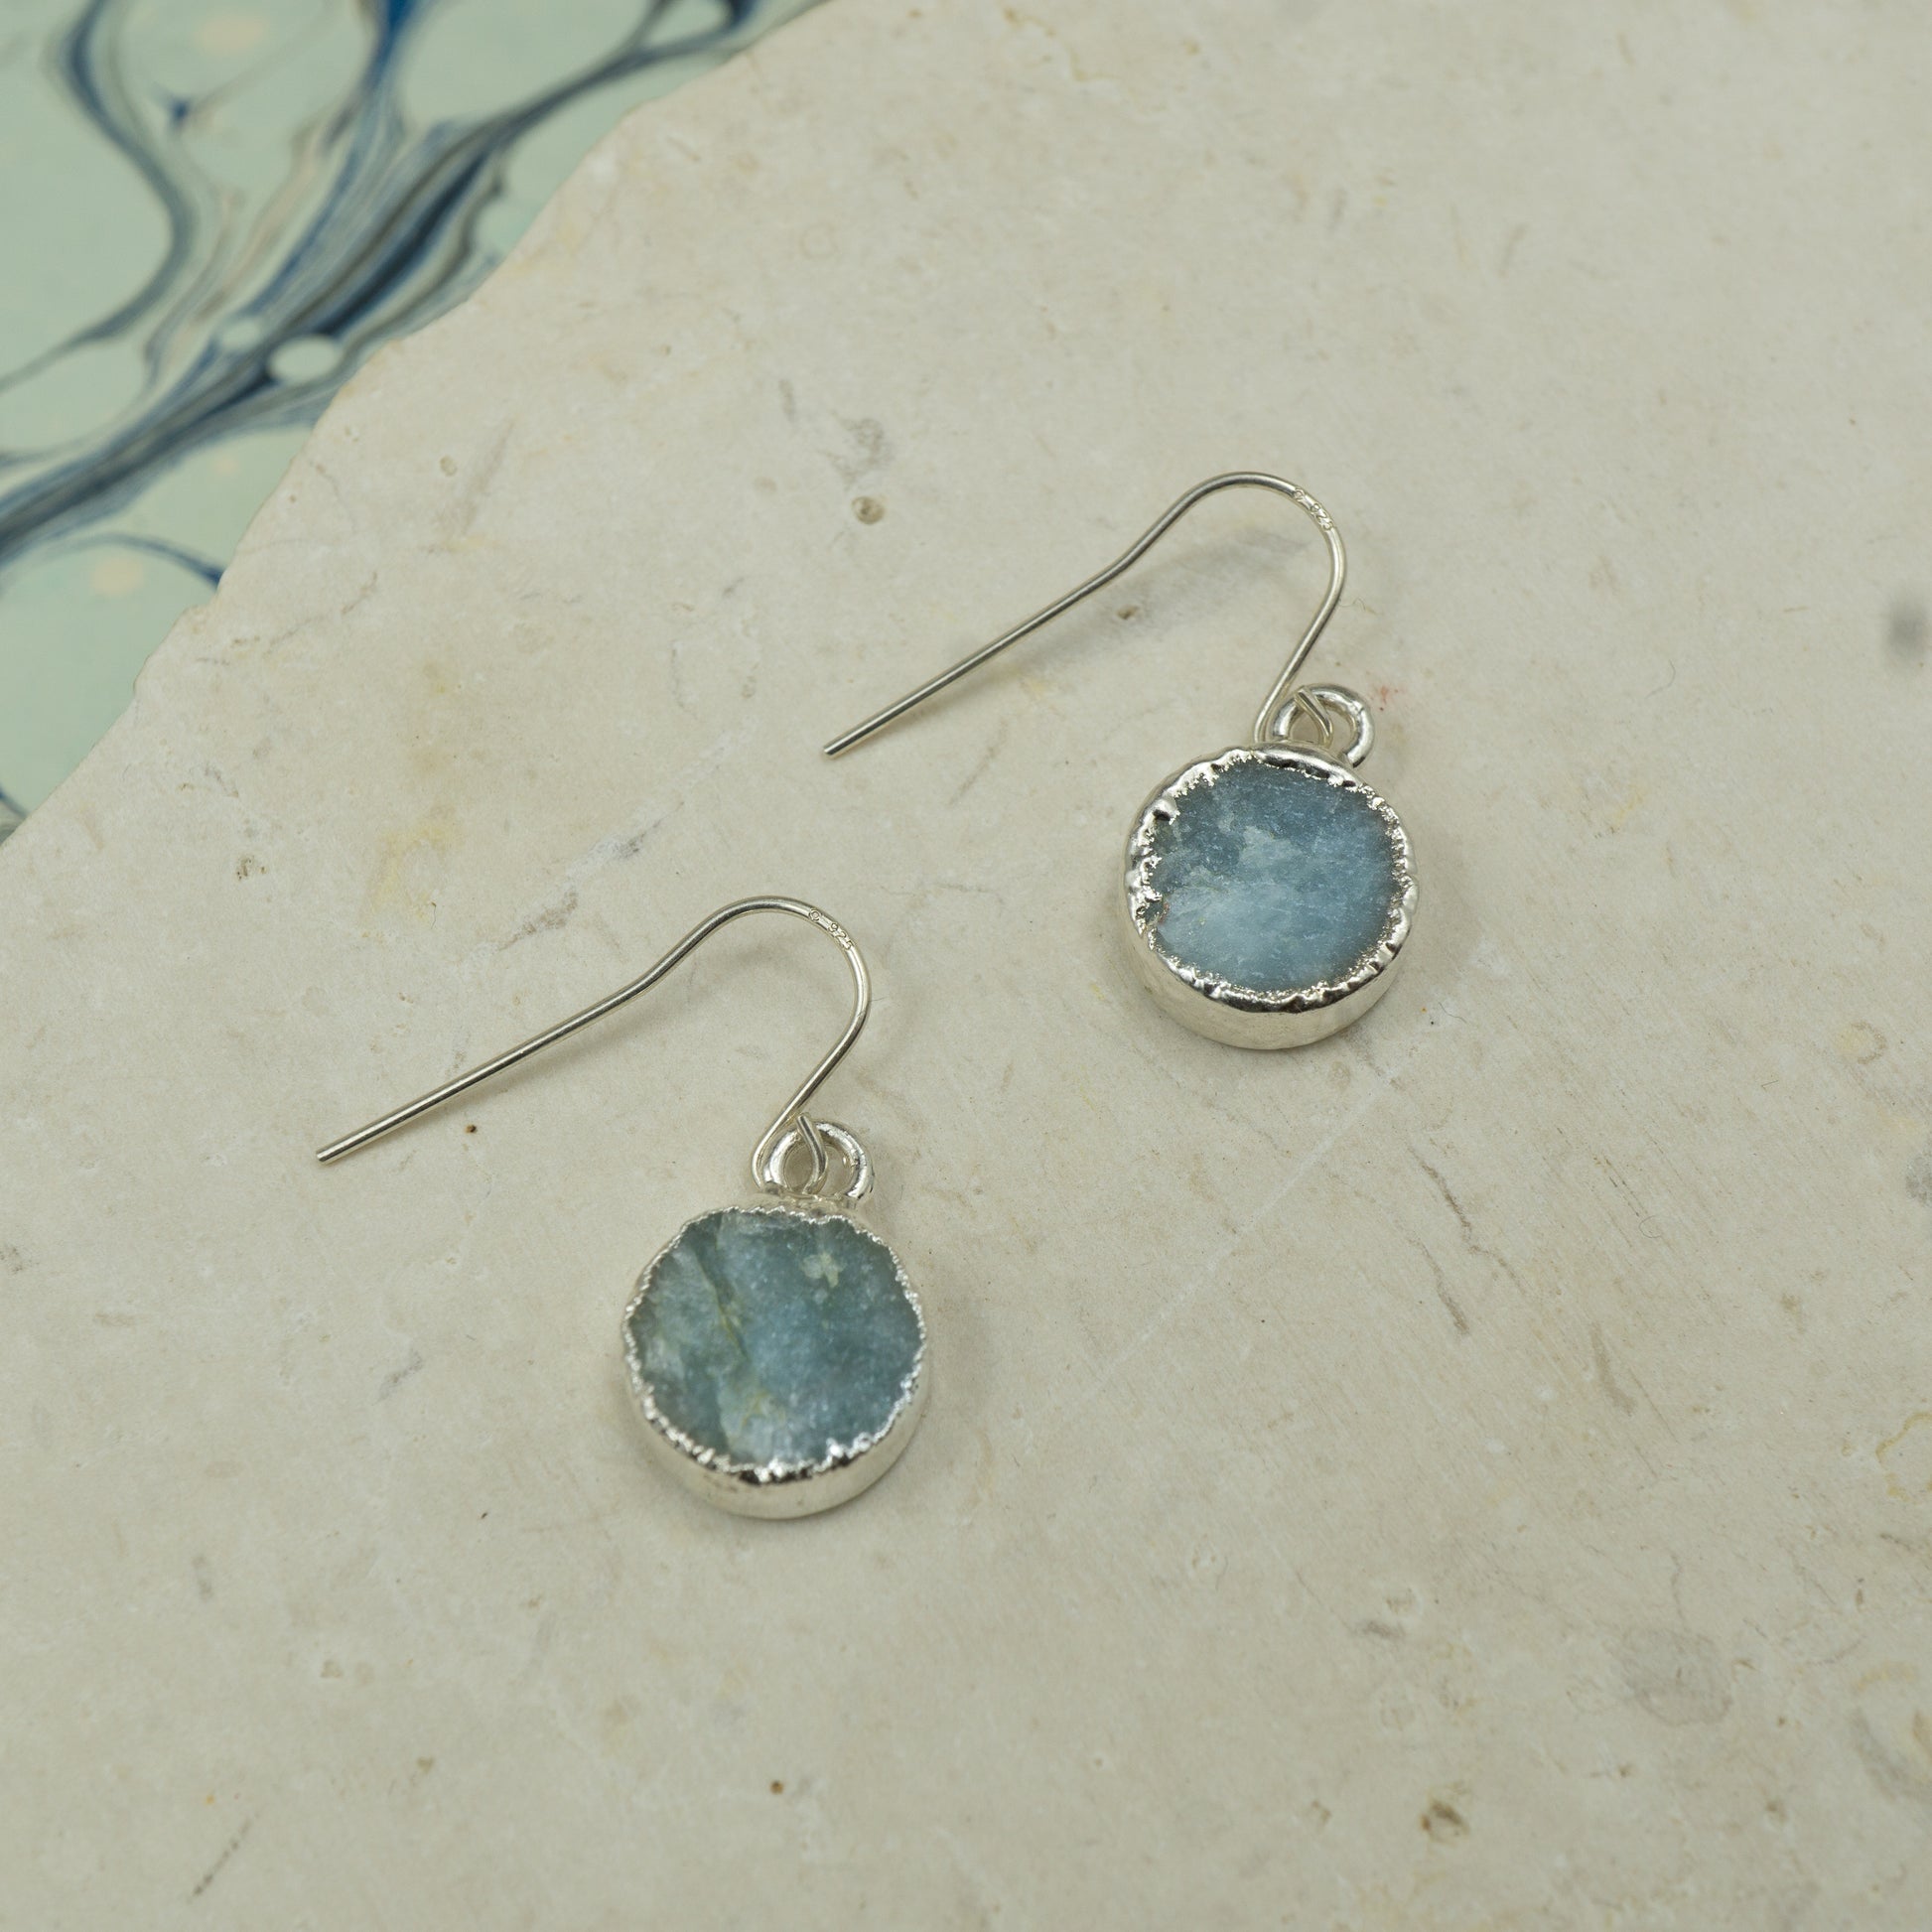 Round raw Blue aquamarine earrings on hooks finished in silver.